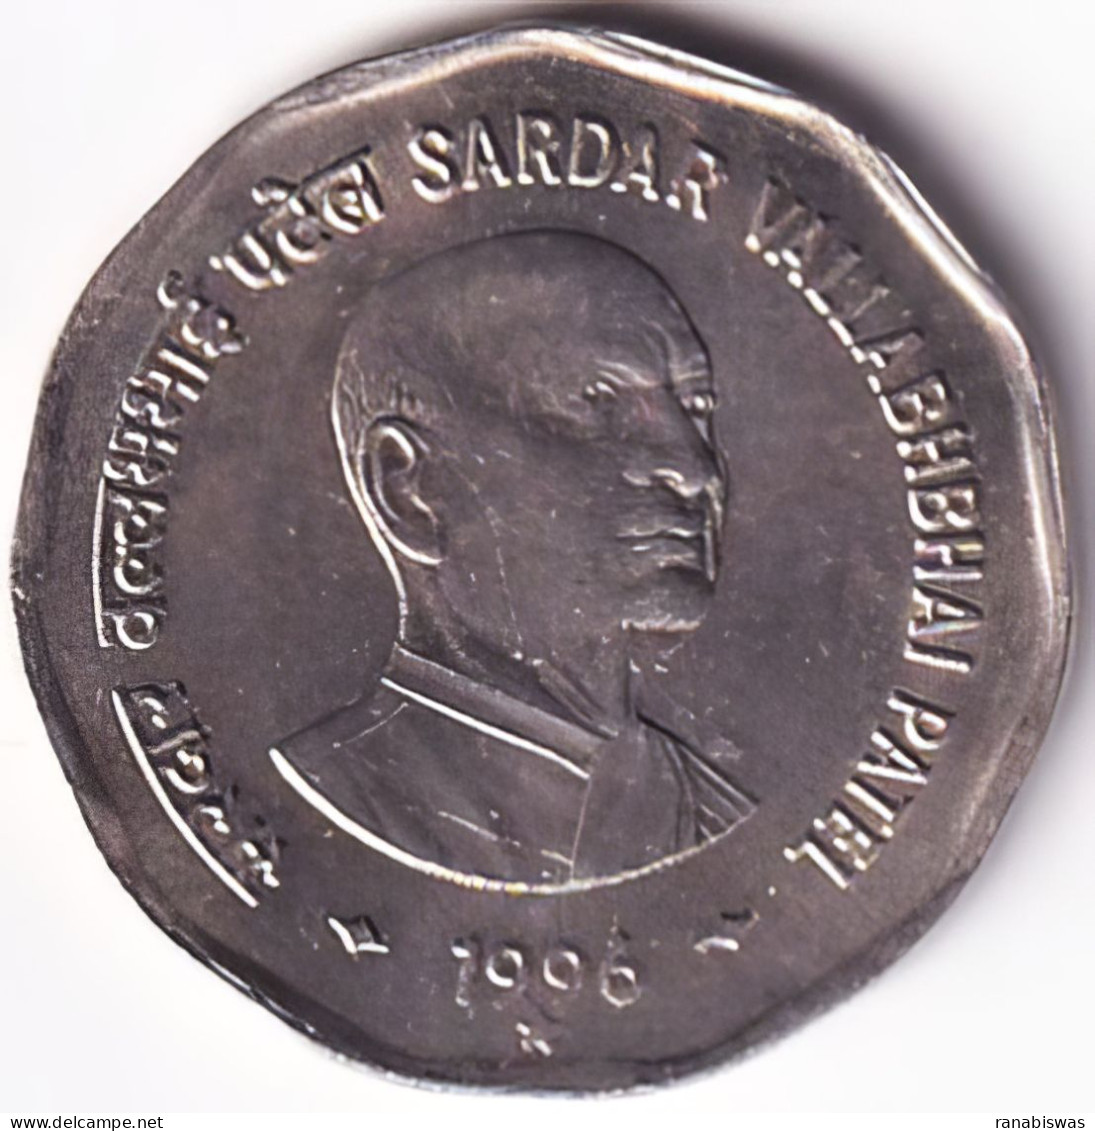 INDIA COIN LOT 74, 2 RUPEES 1996, SARDAR BALLABHBHAI PATEL, HYDERABAD MINT, XF, SCARE - Inde